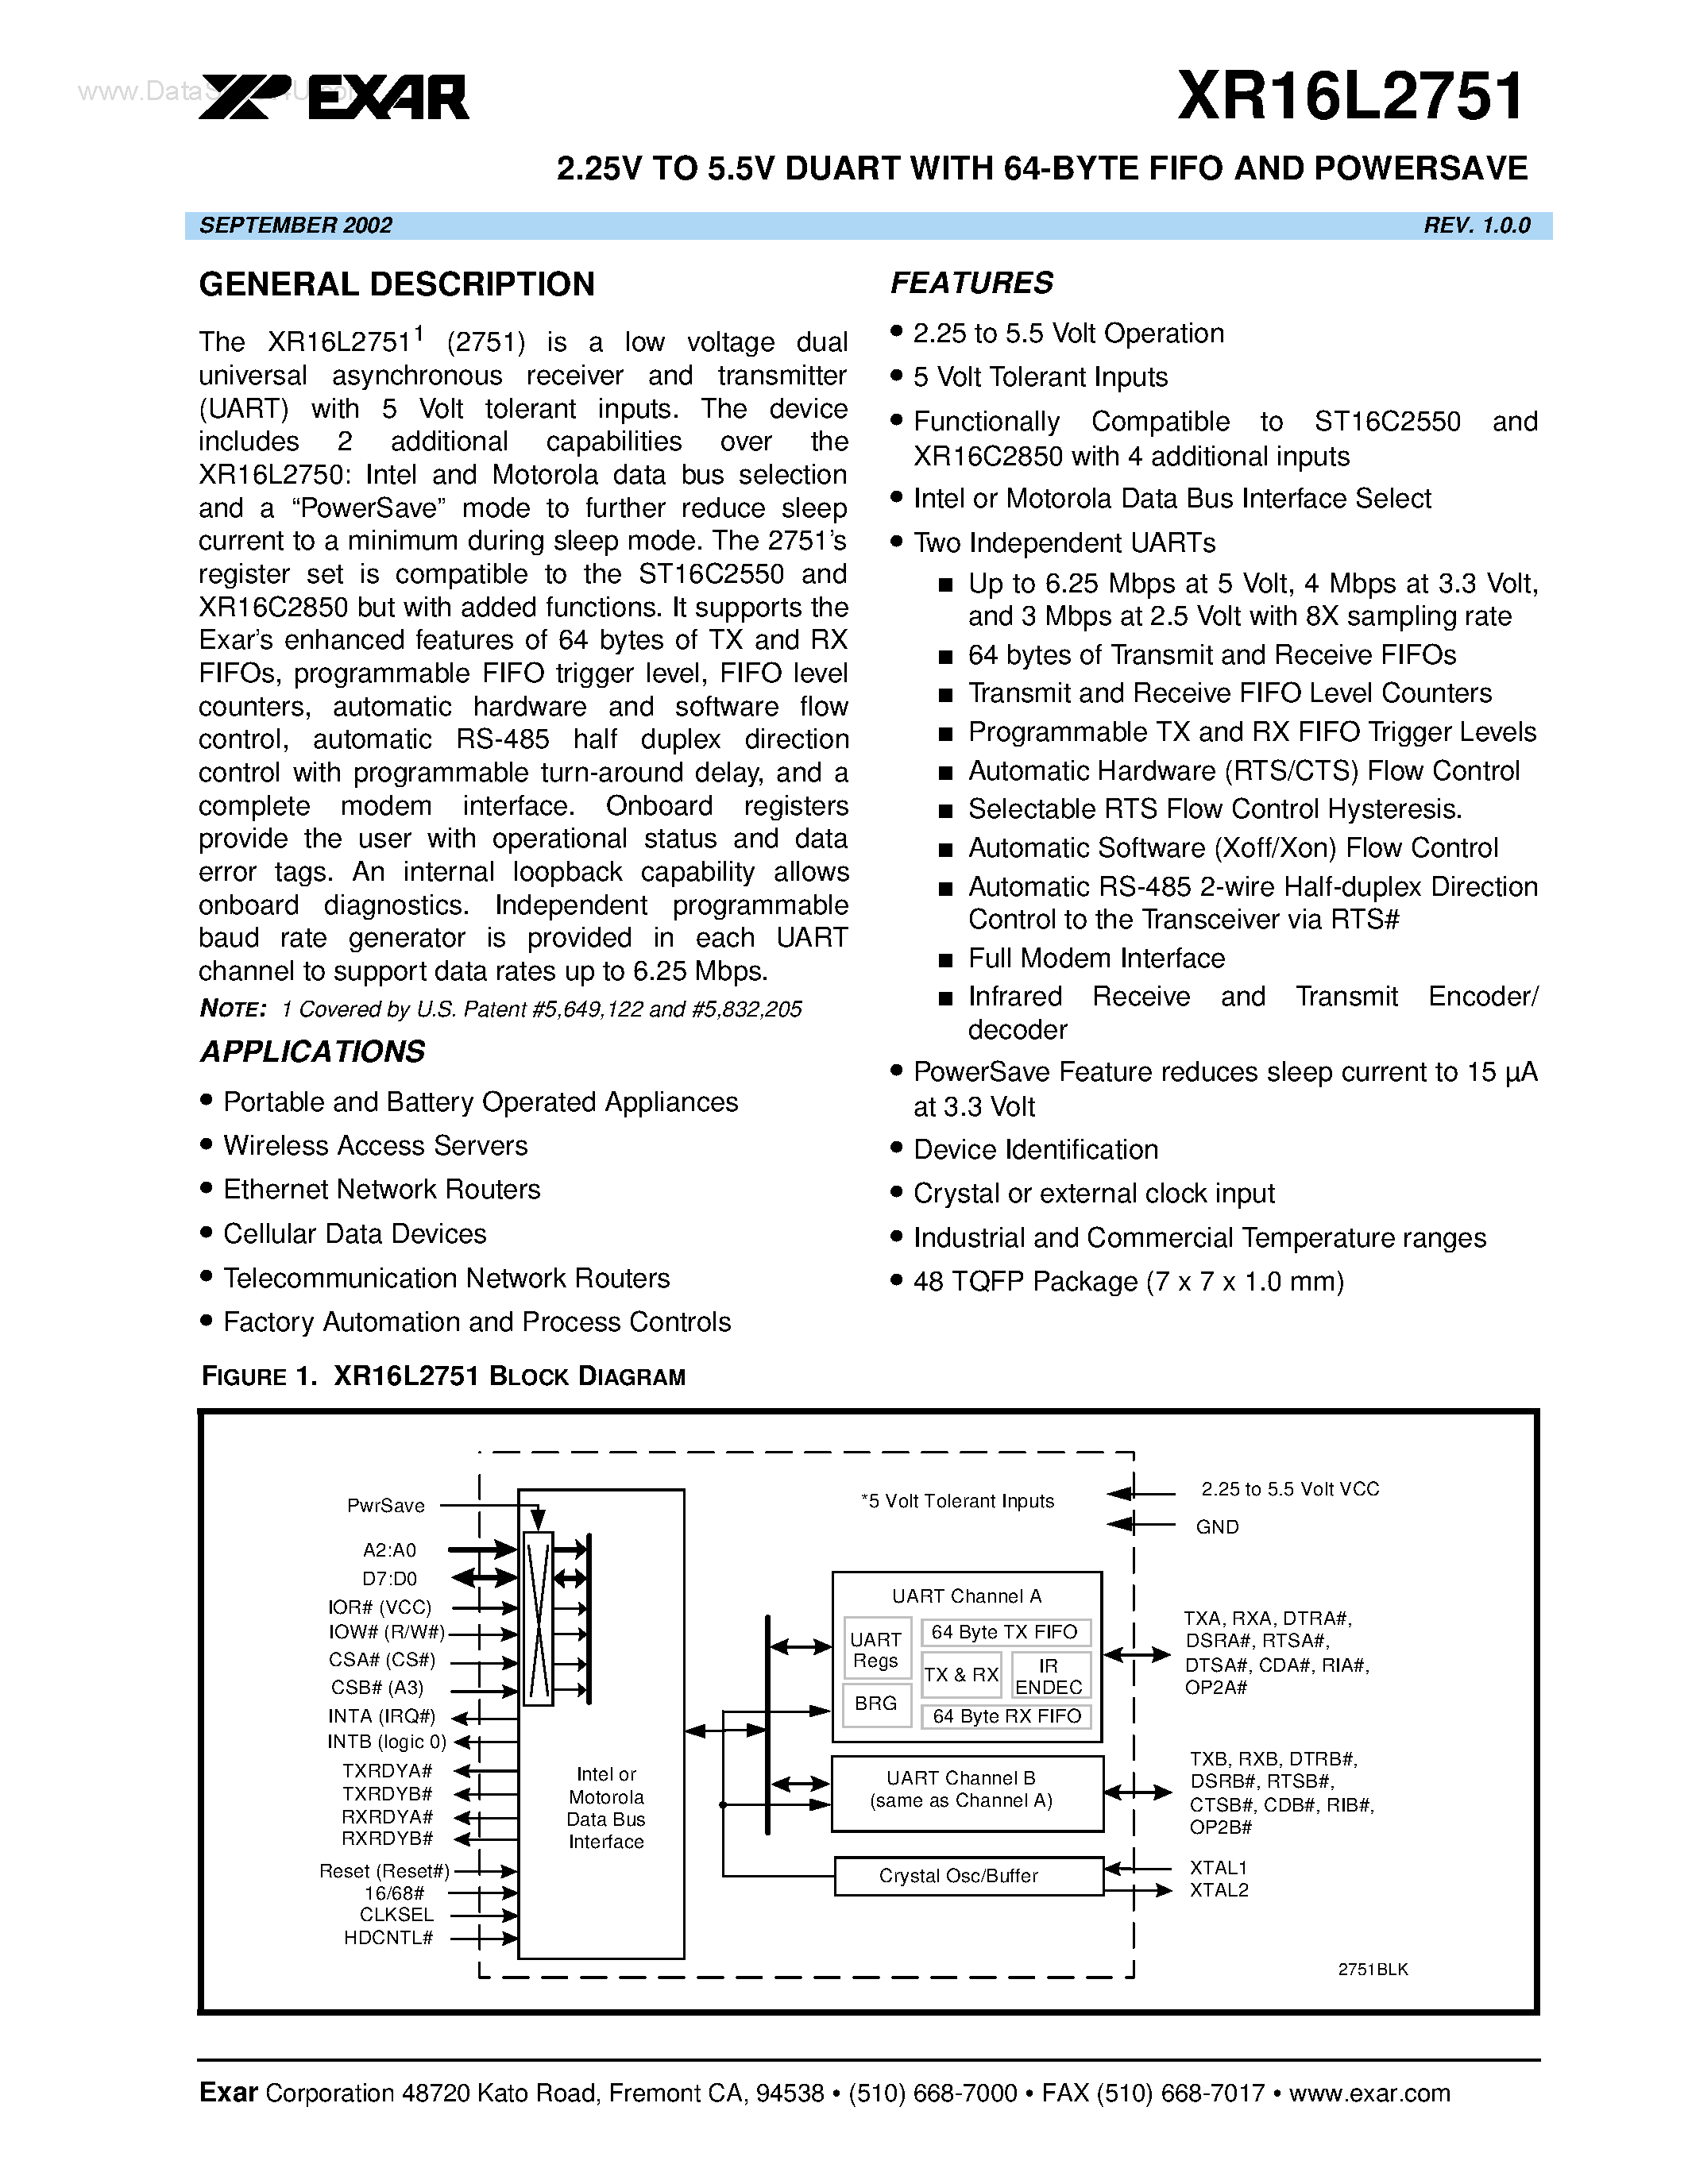 Datasheet XR16L2751 - 2.25V TO 5.5V DUART WITH 64-BYTE FIFO AND POWERSAVE page 1